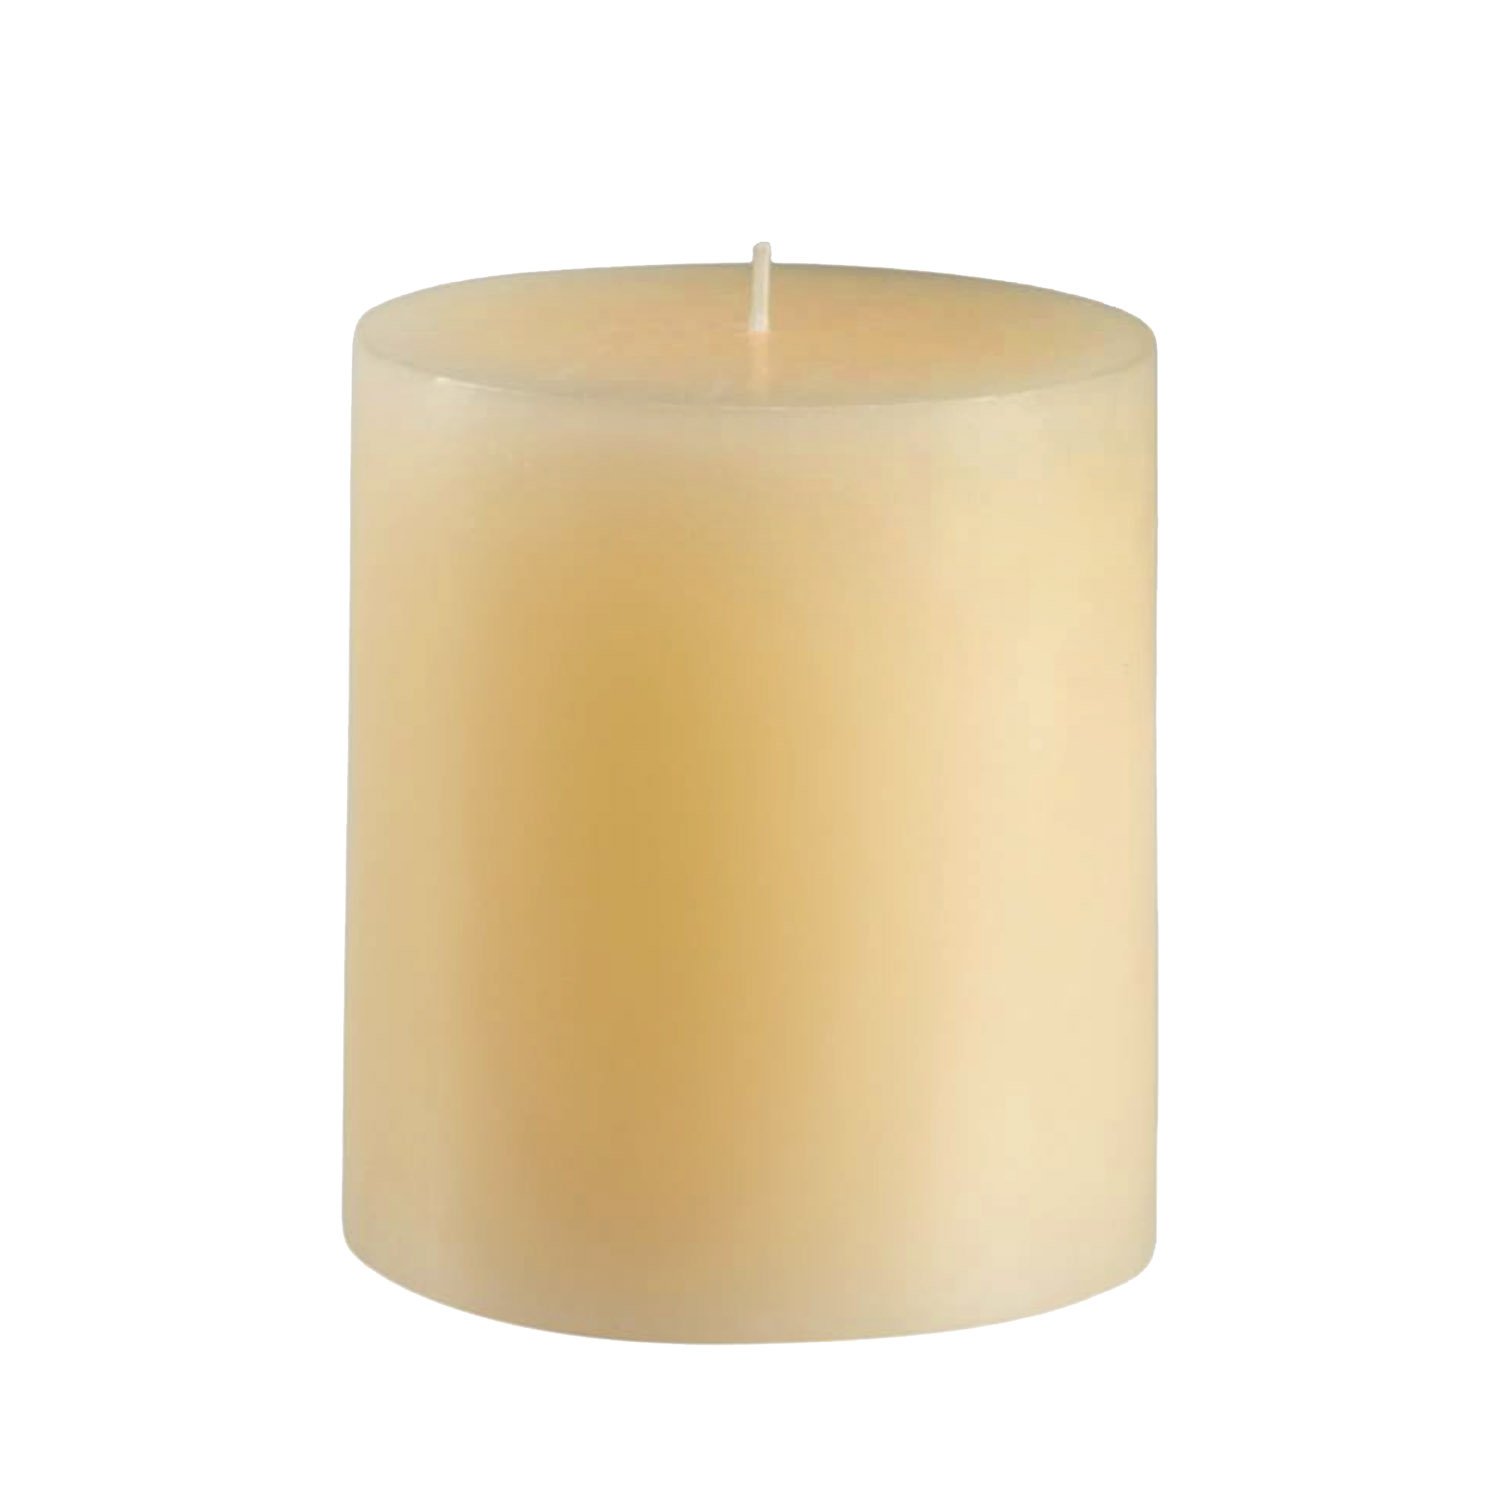 Unscented Candle, $10